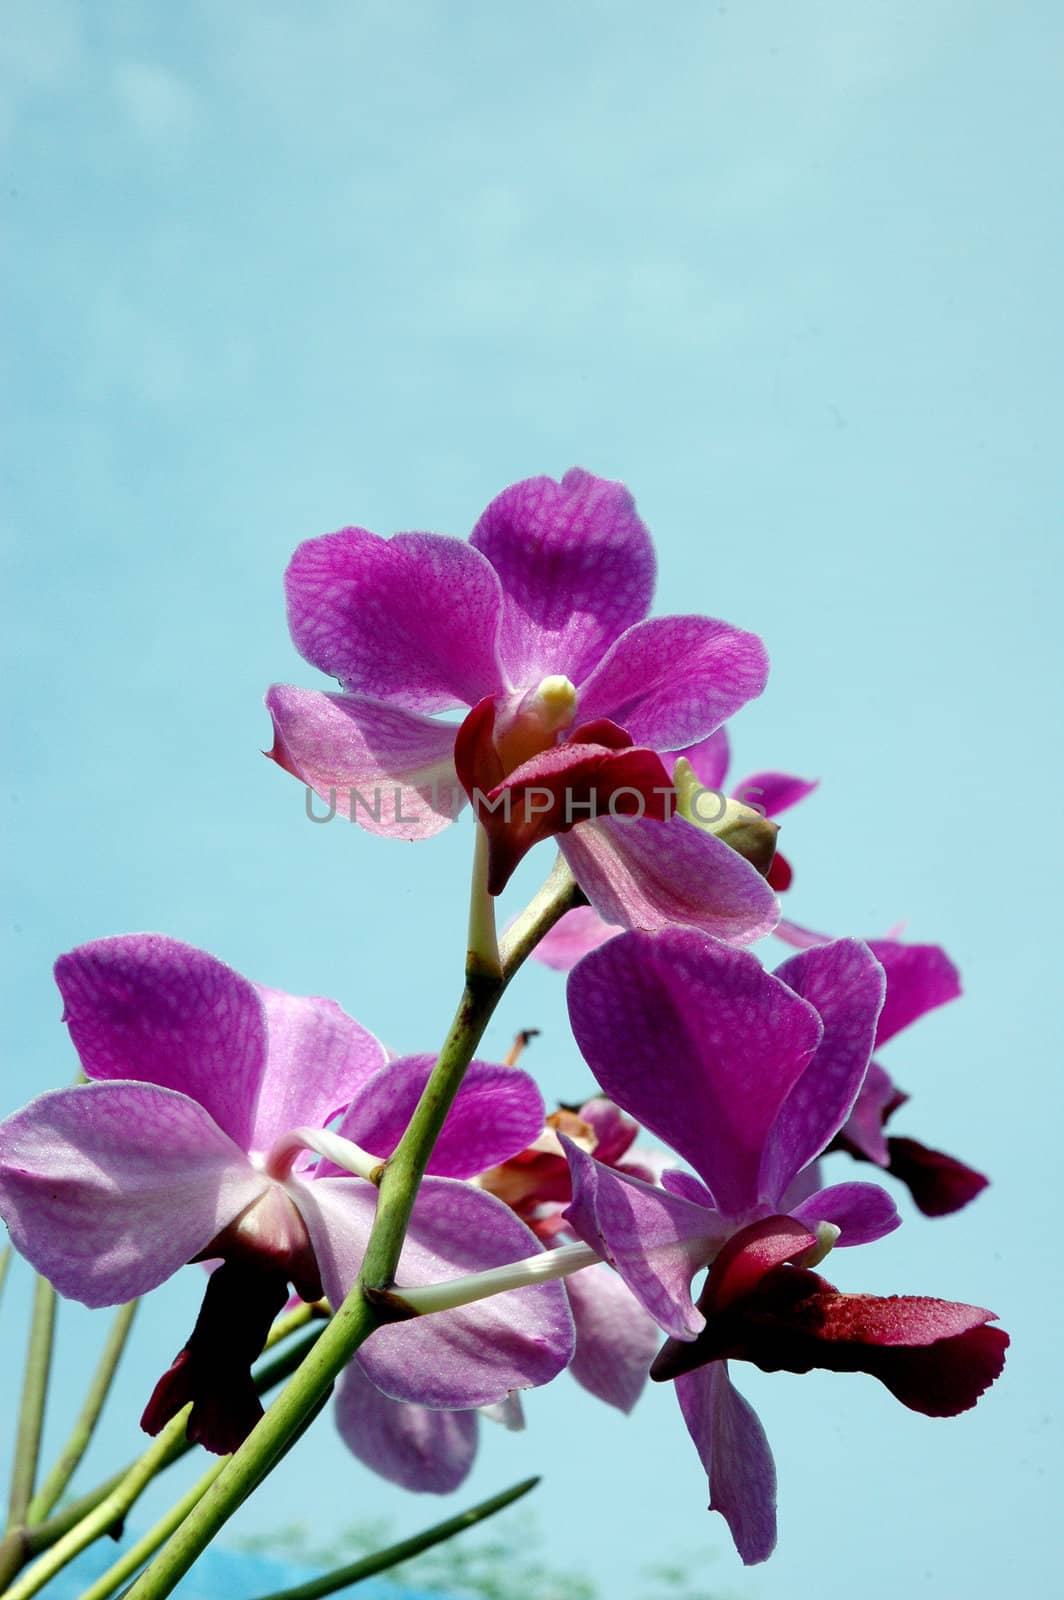 orchid flowers against a background of blue sky